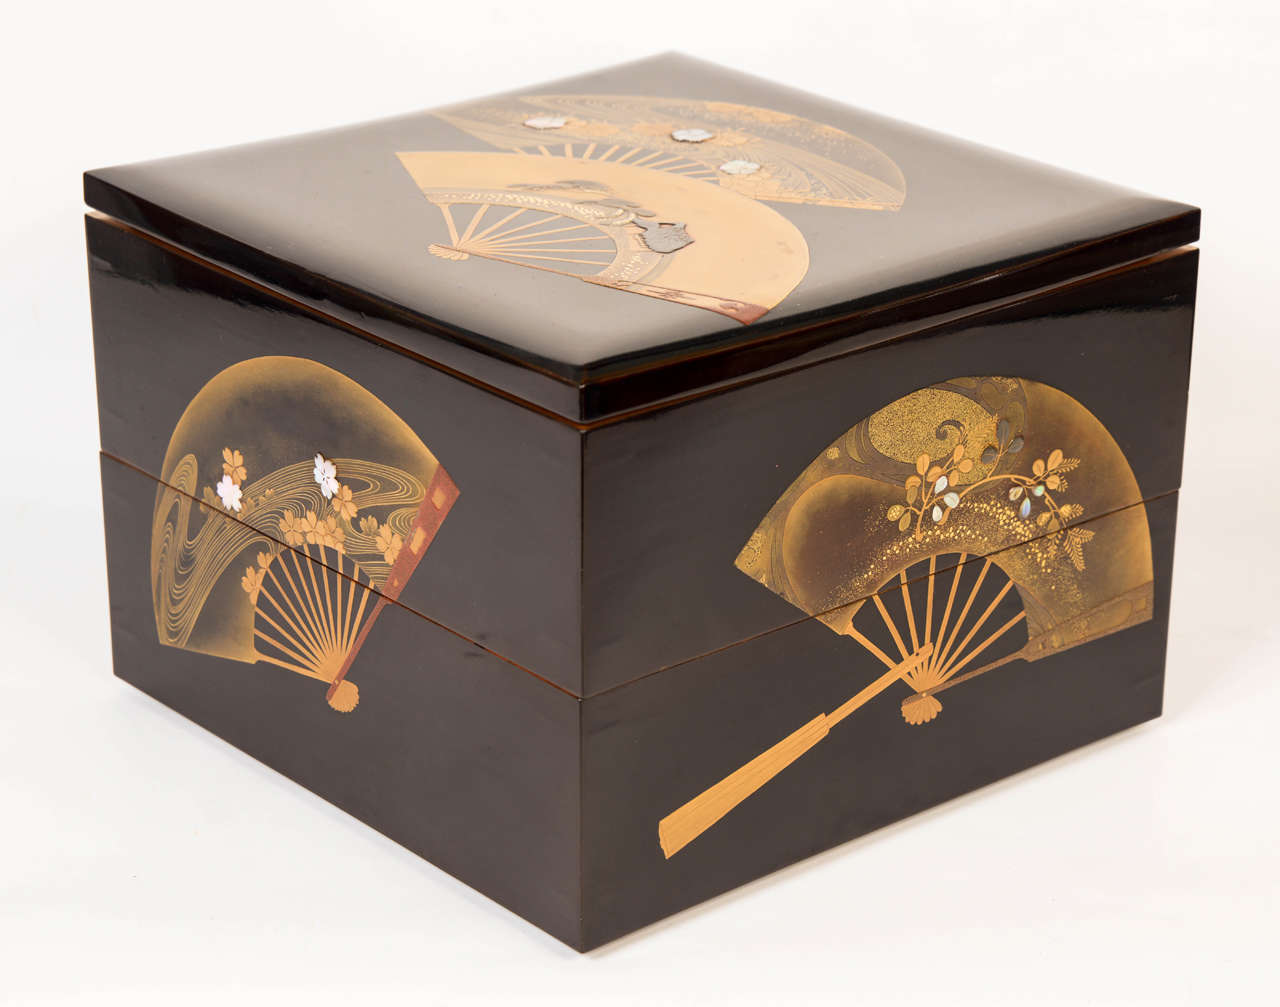 Beautiful two trays jubako black lacquer with a fan decor. Each fan represents a different decor of foliage, figures, animals and ribbons with mixed metal inlays. Nashiji inside.